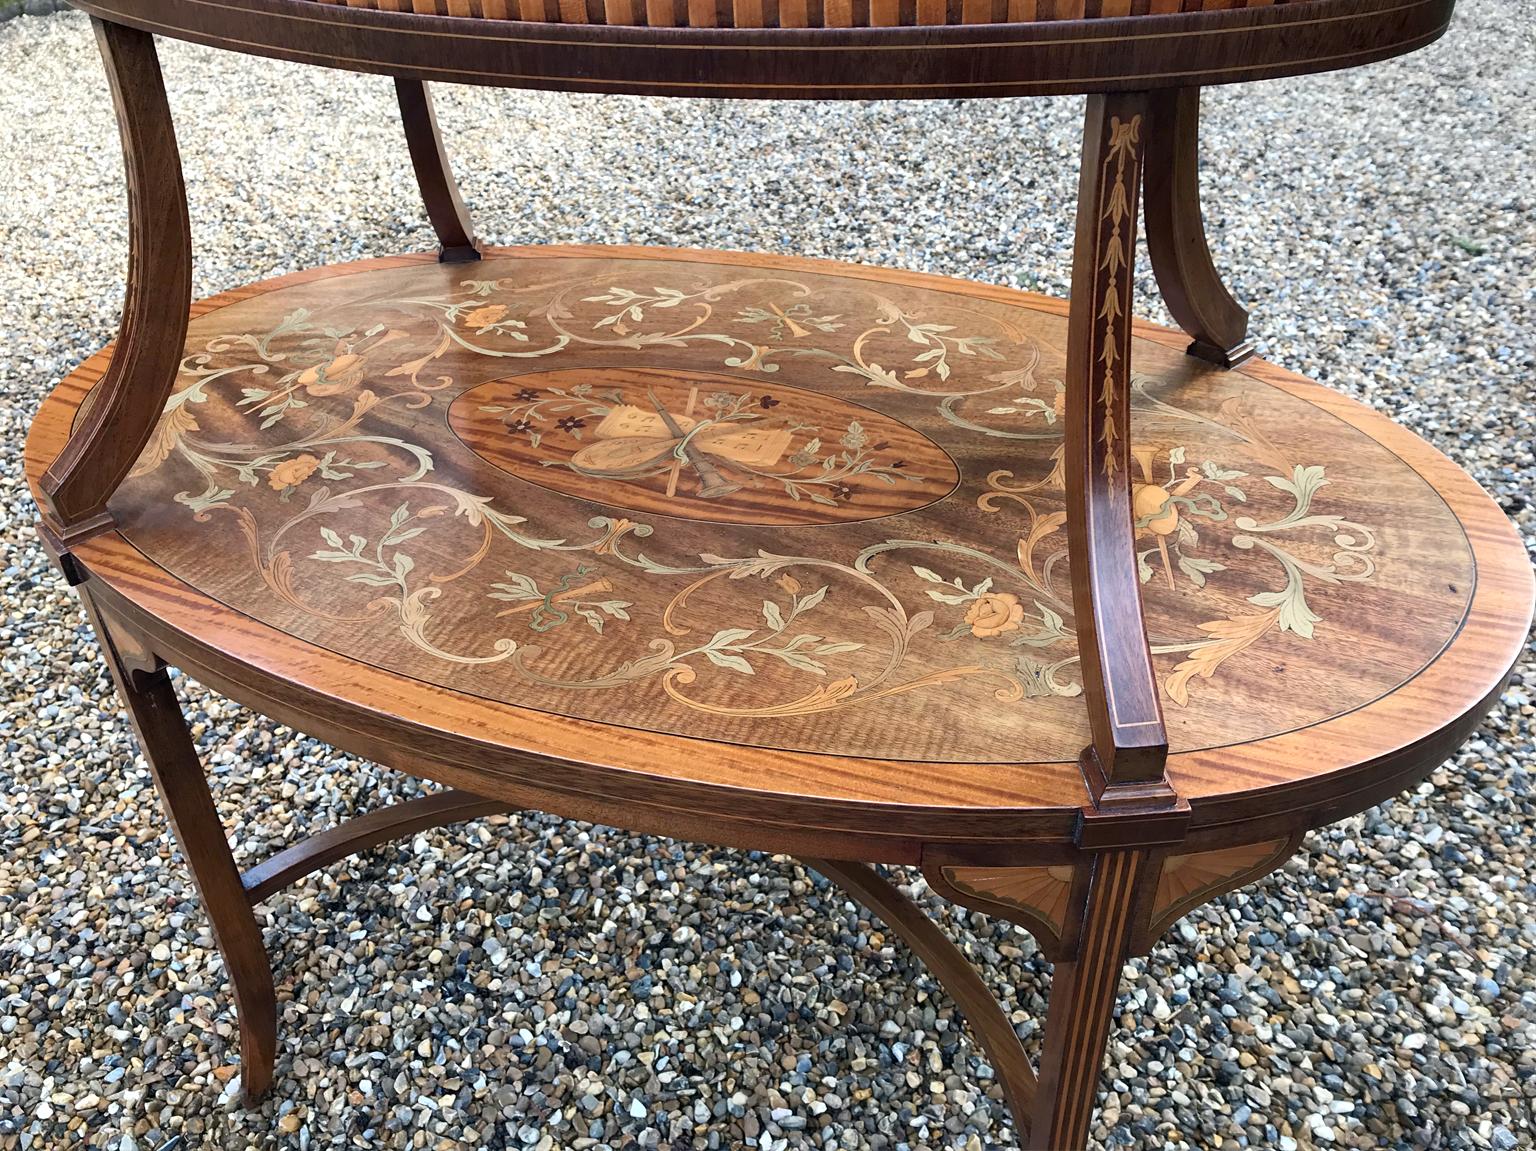 19th Century Mahogany Marquetry Tier Tray Table by S & H Jewell, London im Zustand „Hervorragend“ im Angebot in Richmond, London, Surrey